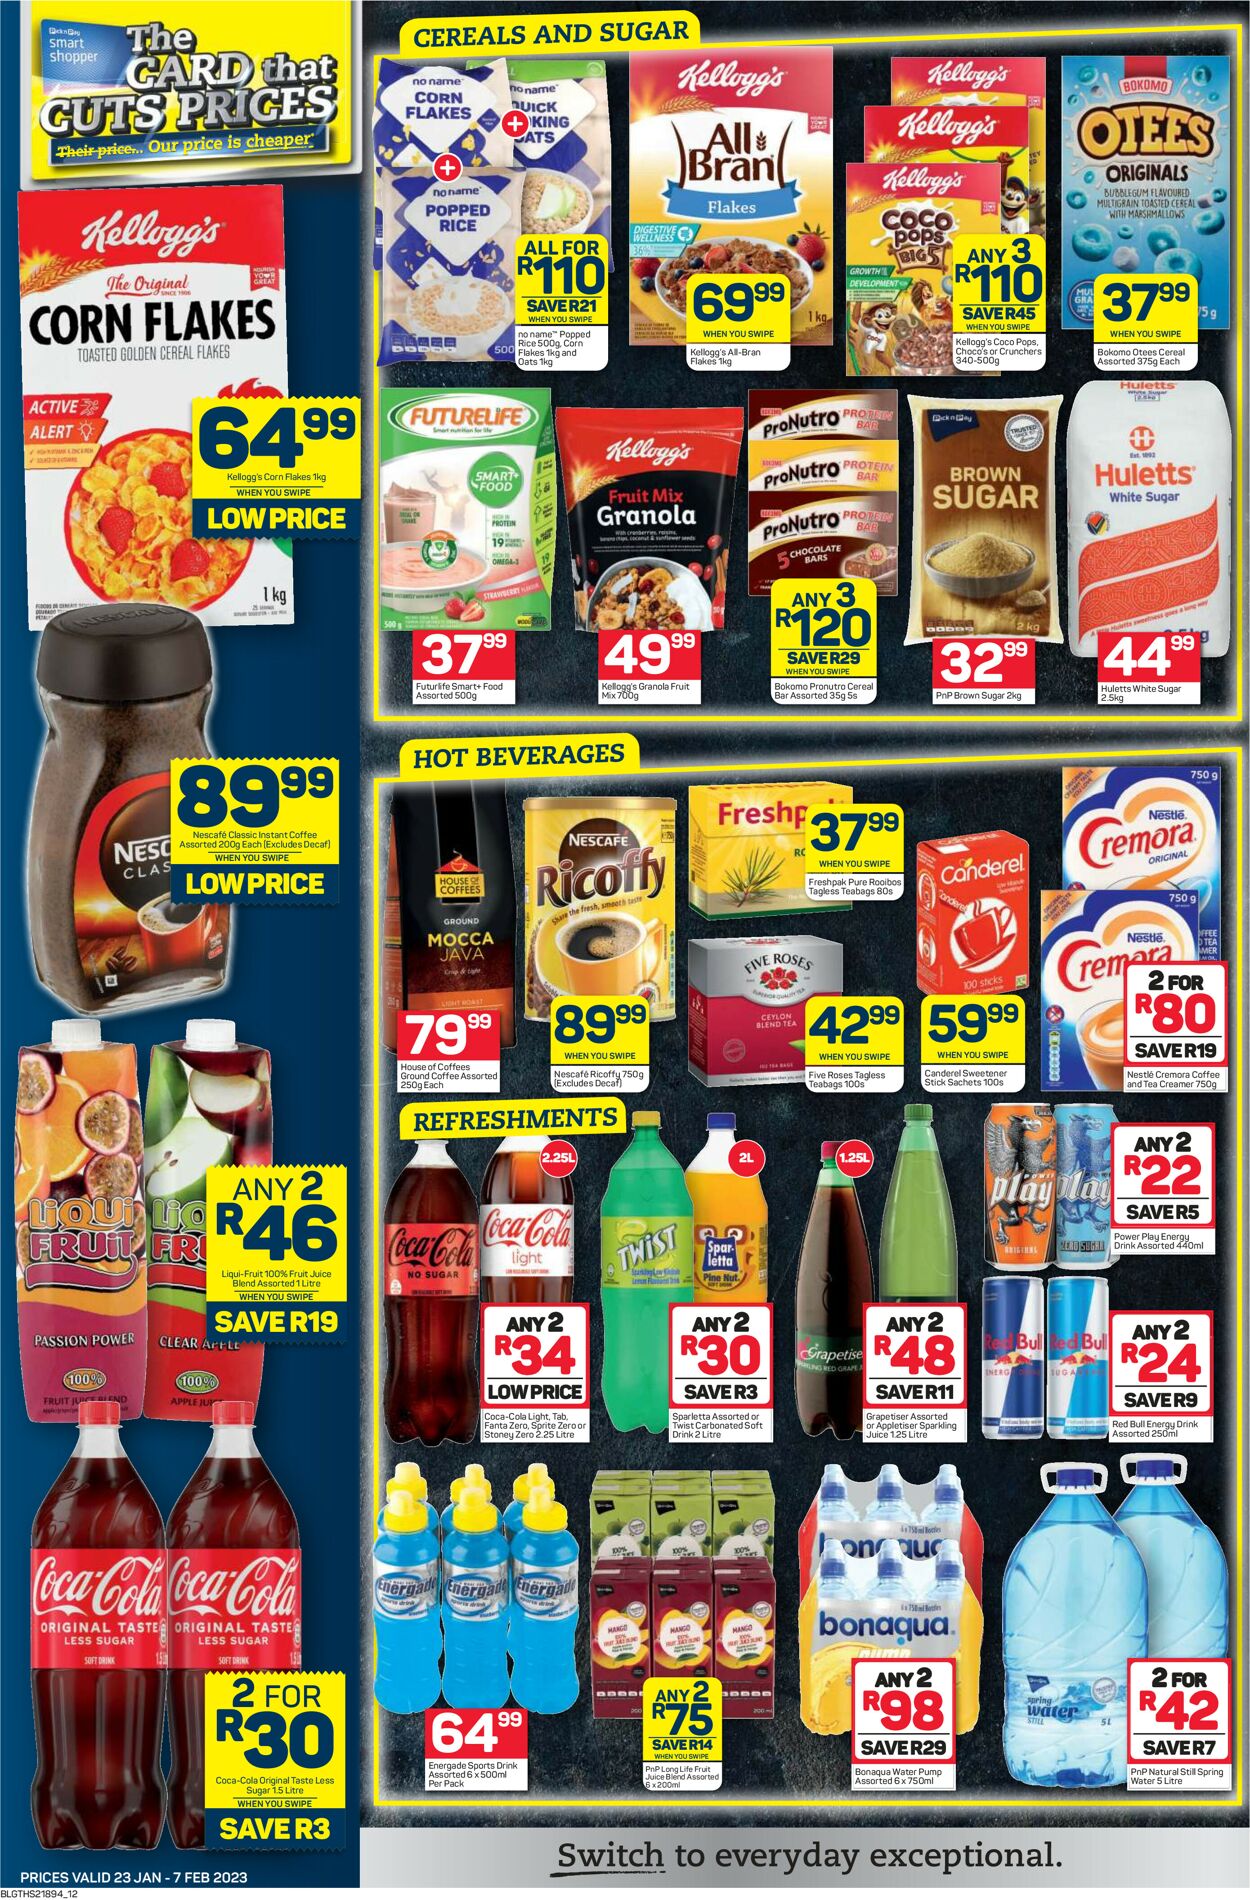 Pick n Pay Catalogue - 2023/01/23-2023/02/07 (Page 12)